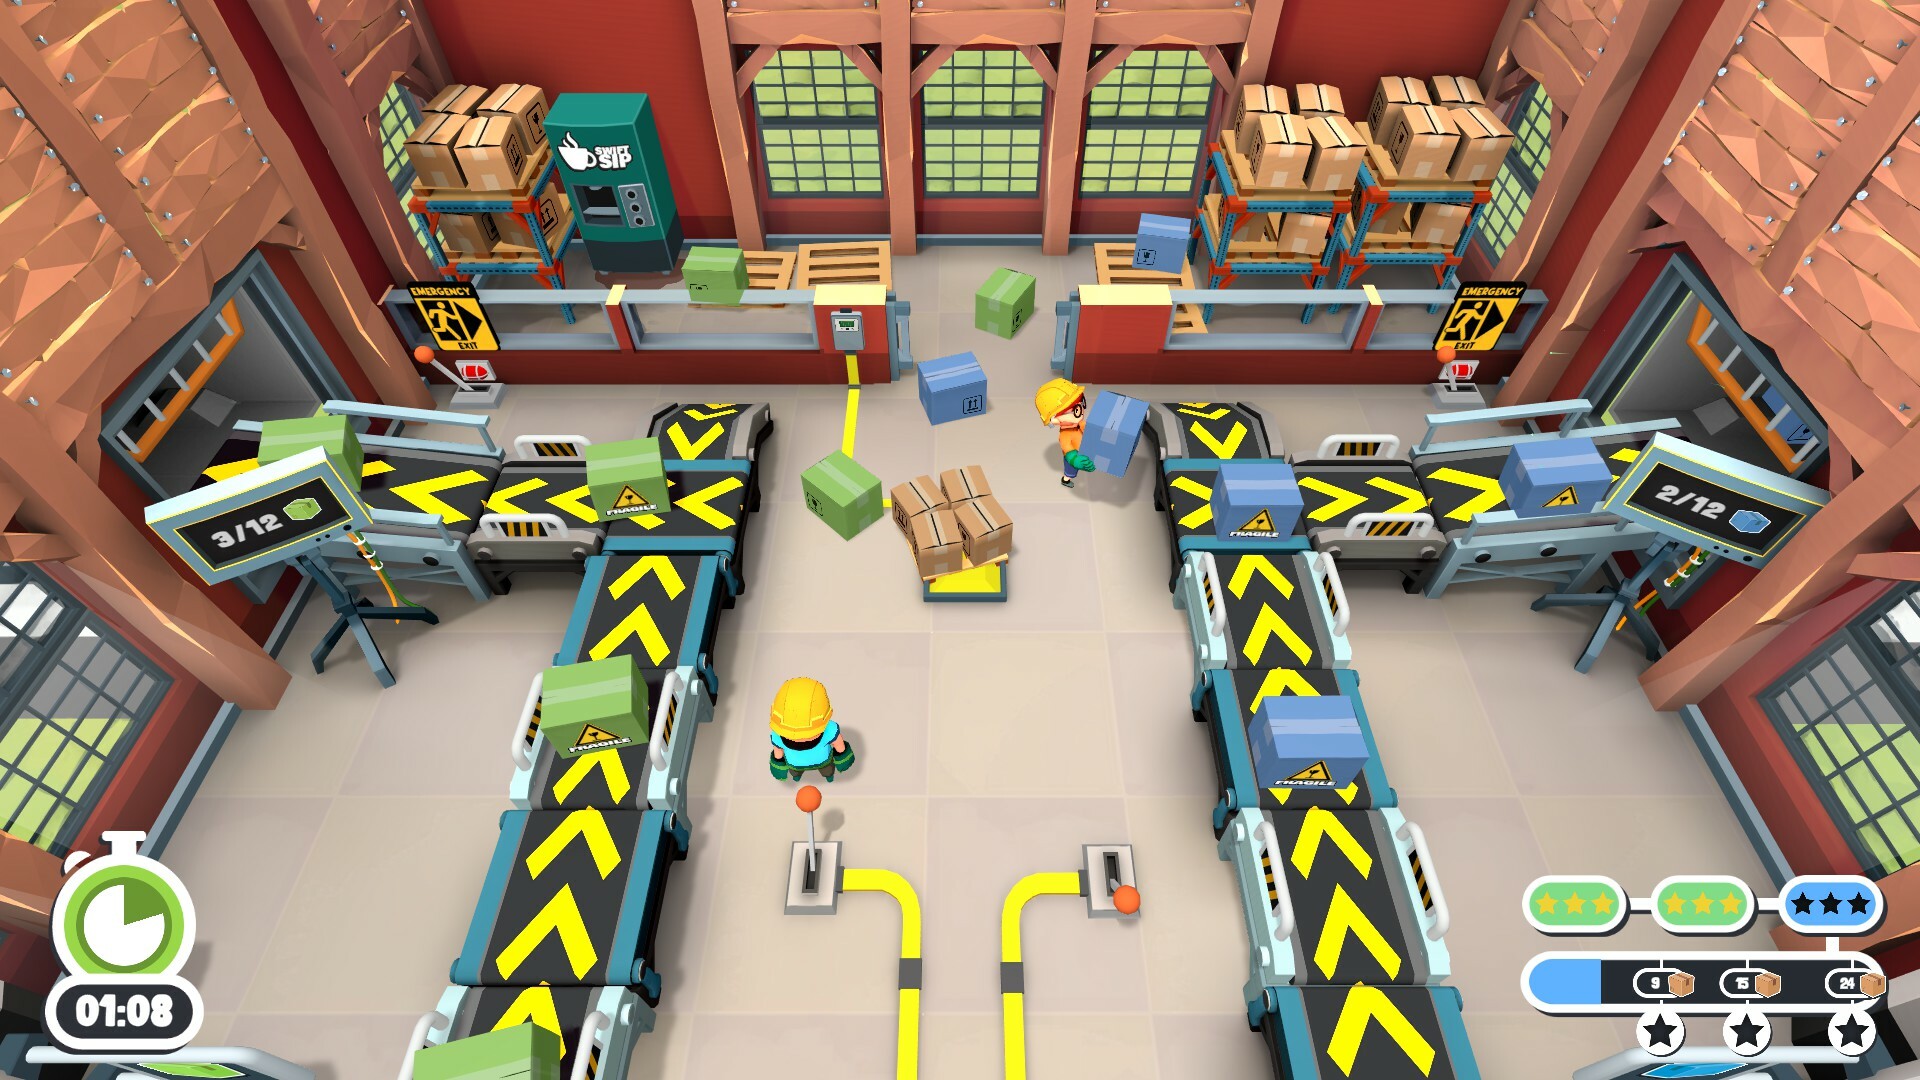 Here’s a chaos co-op take on getting boxes off the shipping floor and out the factory door